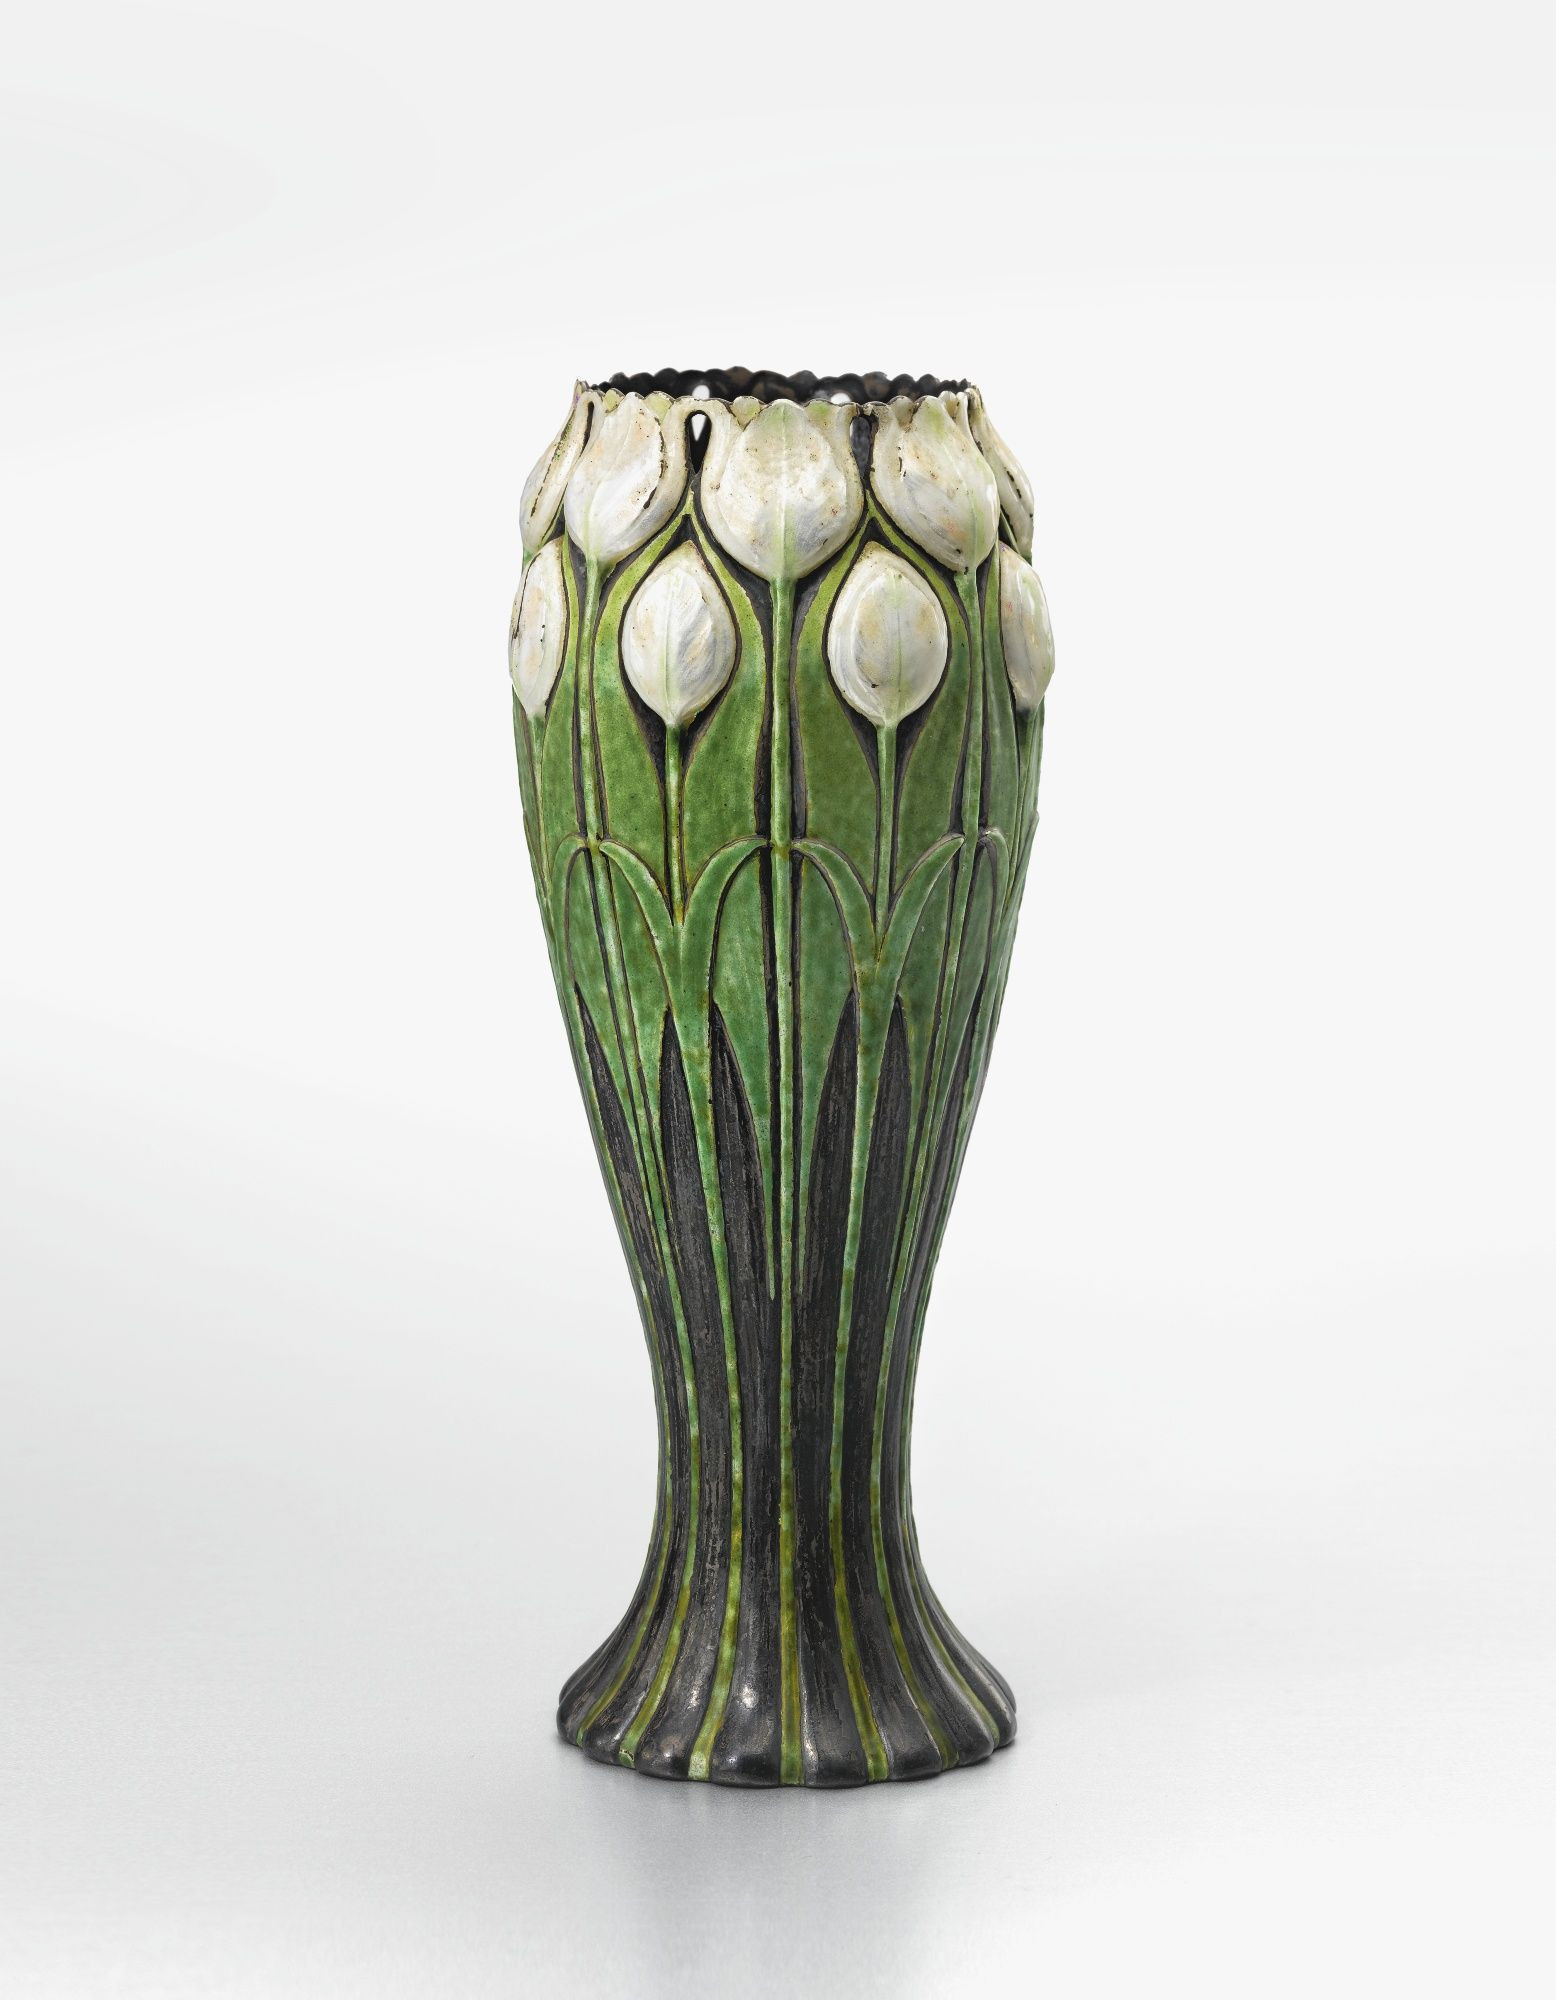 29 Lovely Antique Lalique Vases 2024 free download antique lalique vases of crystal vase prices images lalique luxembourg crystal bowl lalique inside crystal vase prices images tiffany co tulip vase impressed tiffany co makers